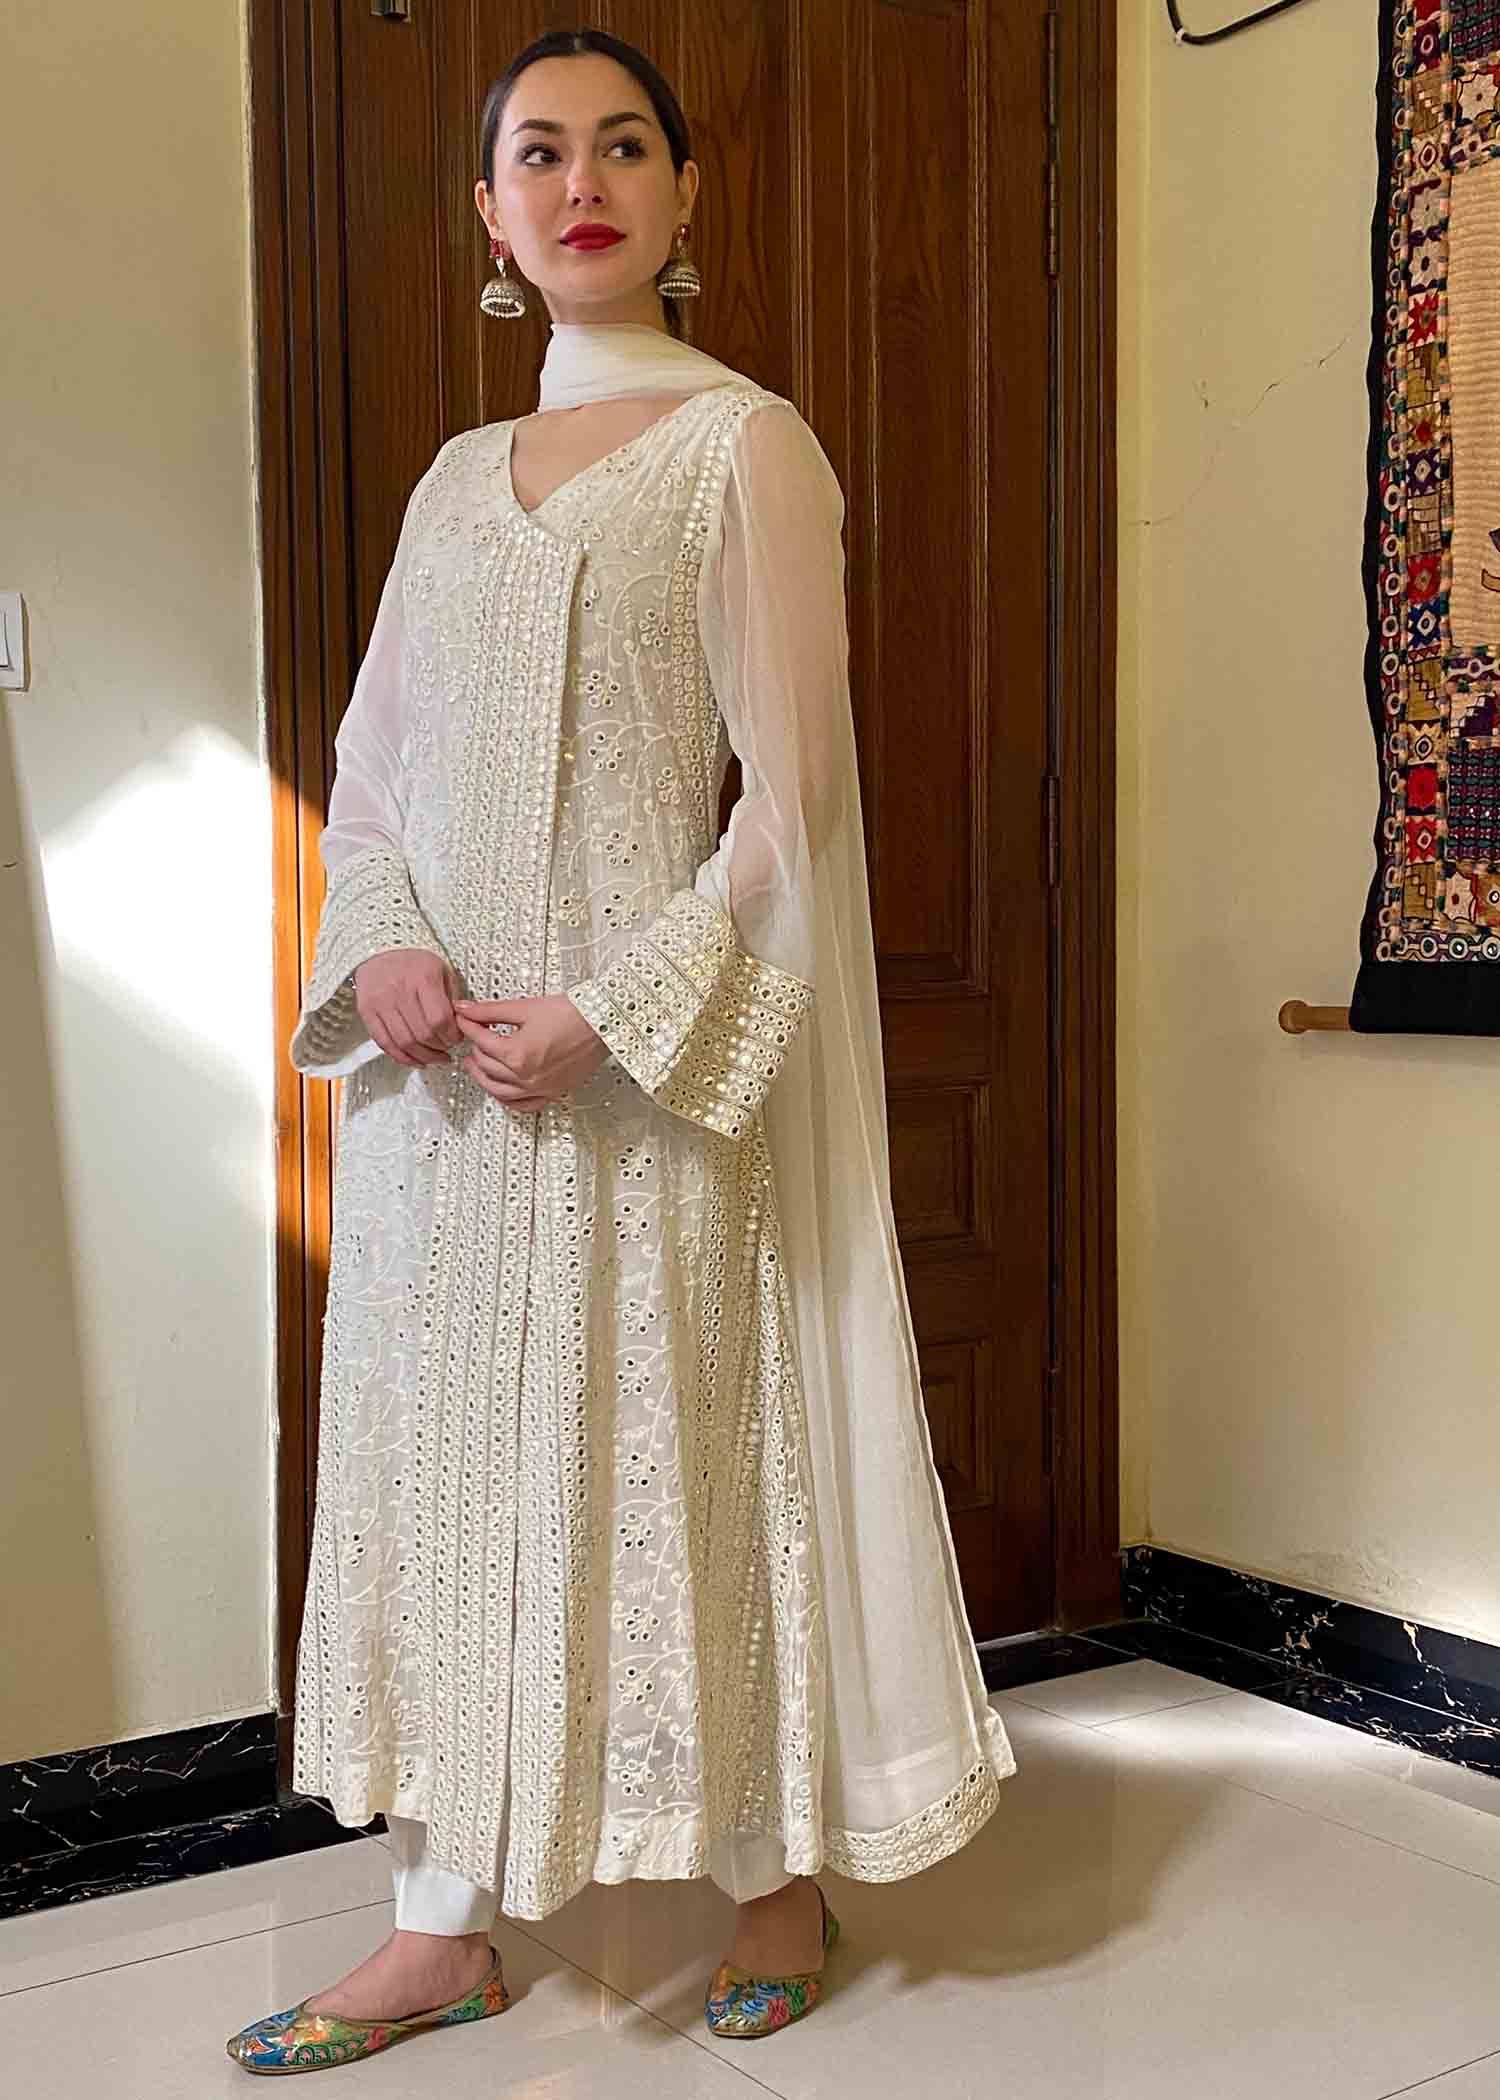 Ethnic Flair: Flaunt Tradition with Pakistani Frocks